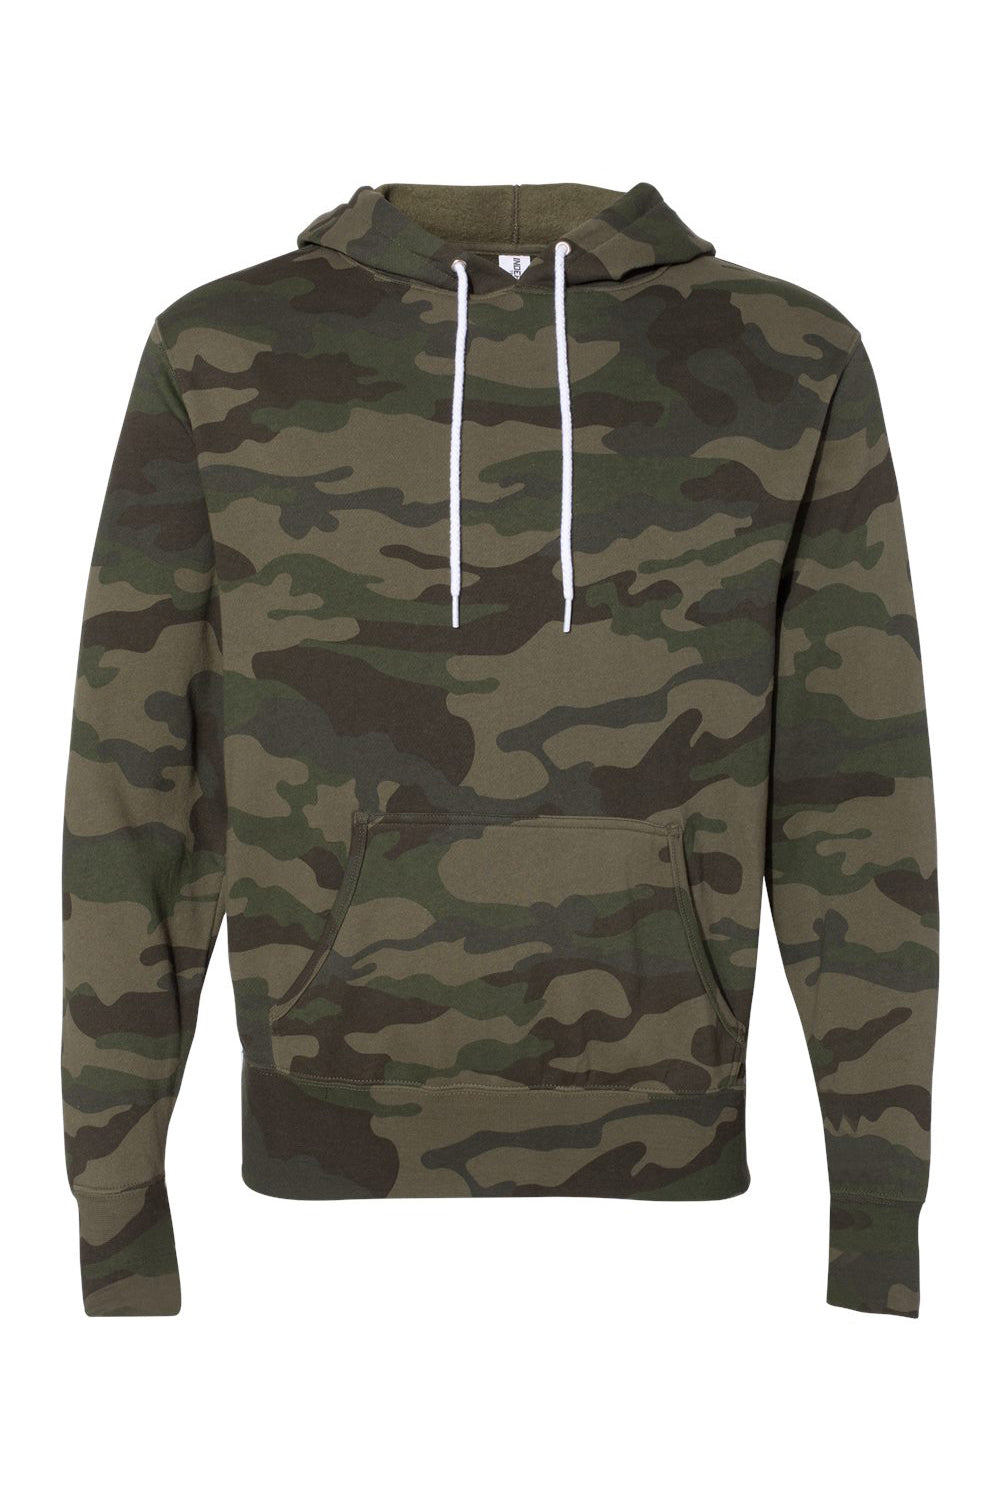 Independent Trading Co. AFX90UN Mens Hooded Sweatshirt Hoodie Forest Green Camo Flat Front